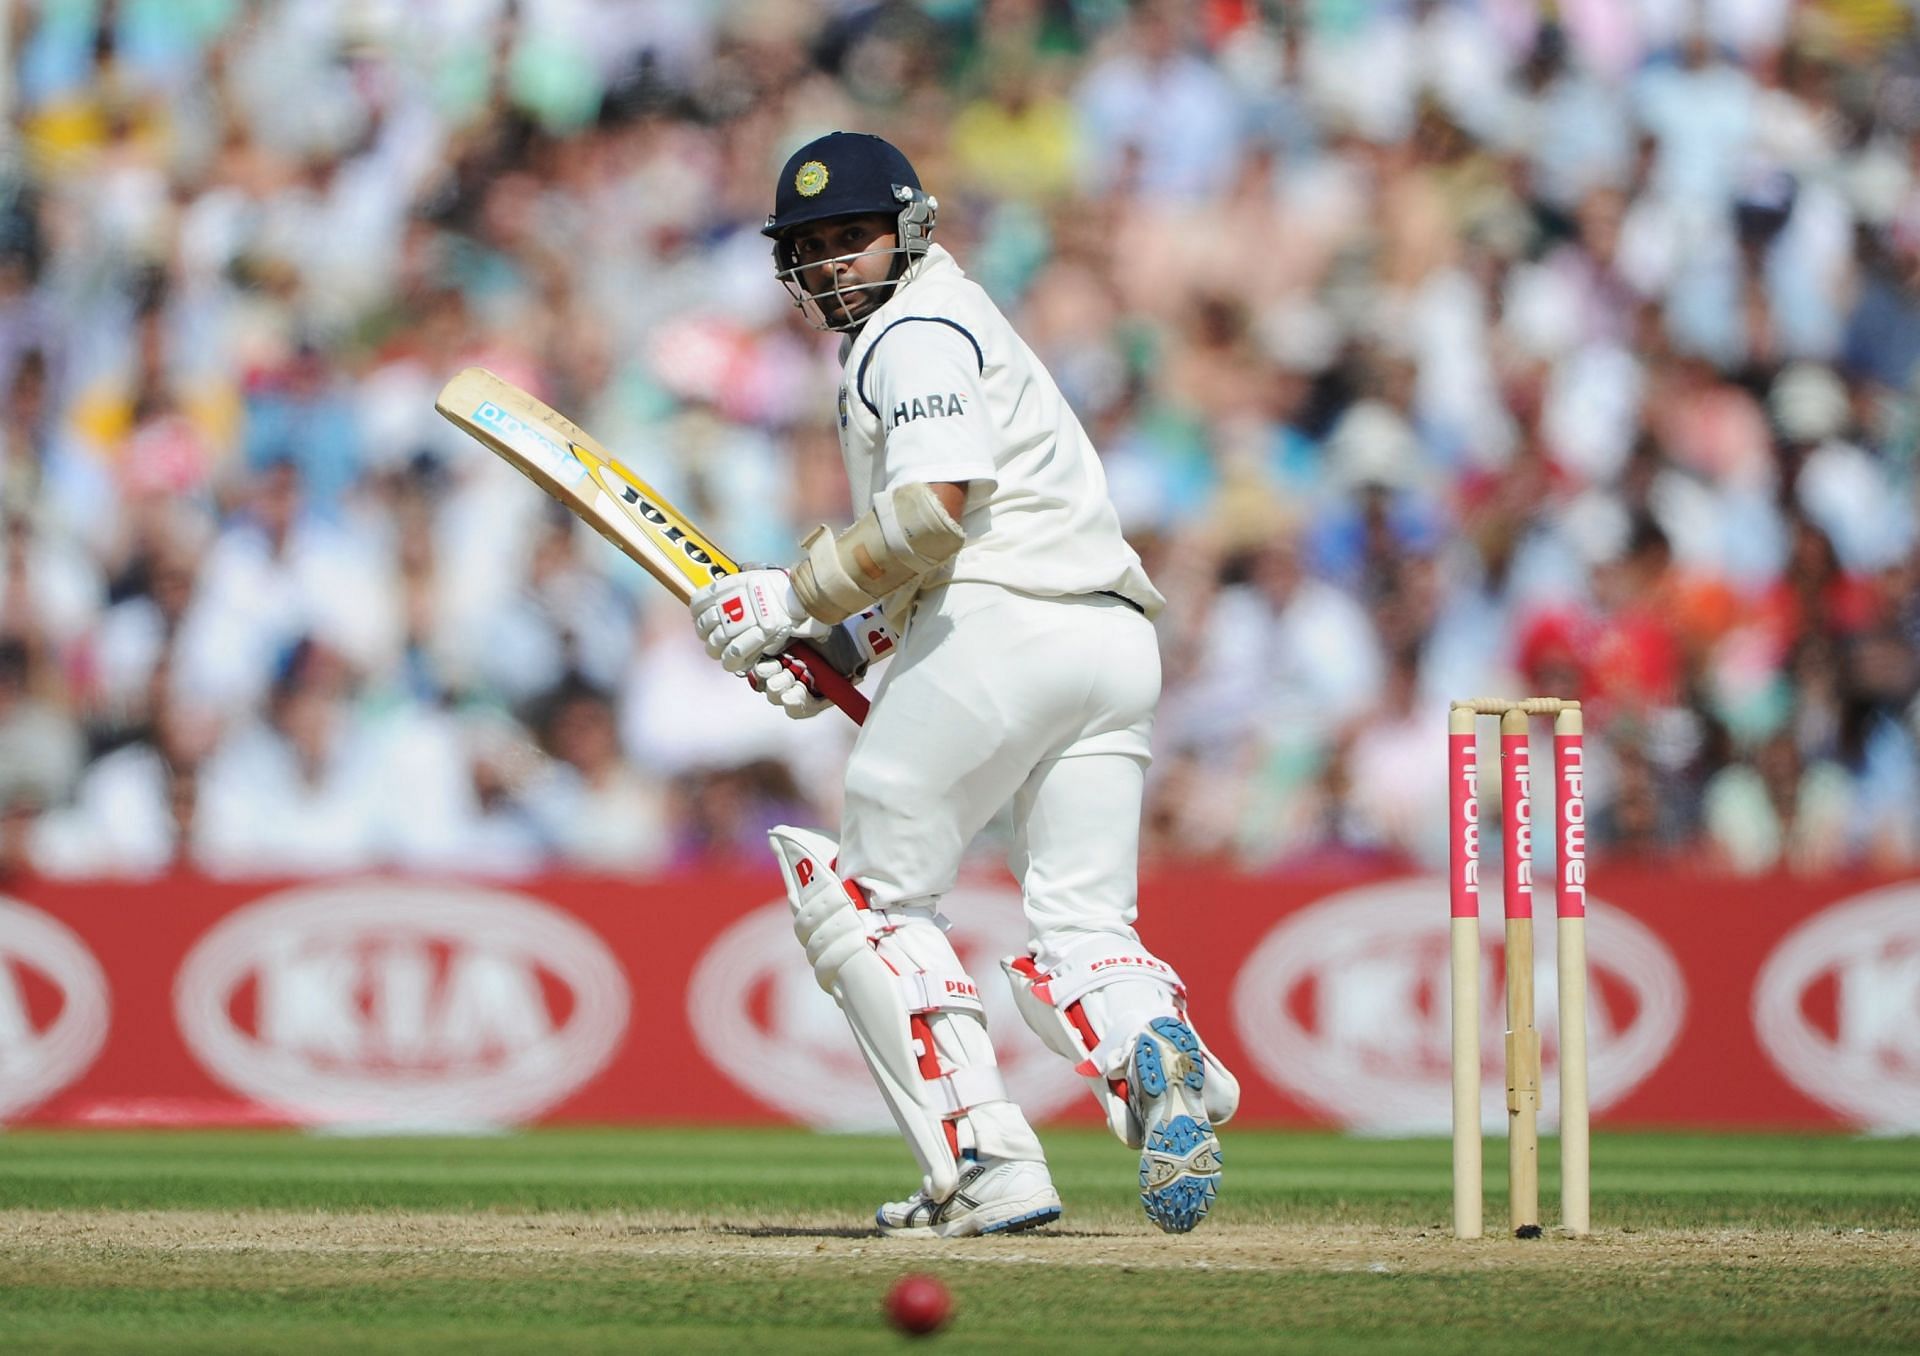 Amit Mishra scored 84 runs in a Test match at Kennington Oval back in 2011 (Image Courtesy: Getty Images)